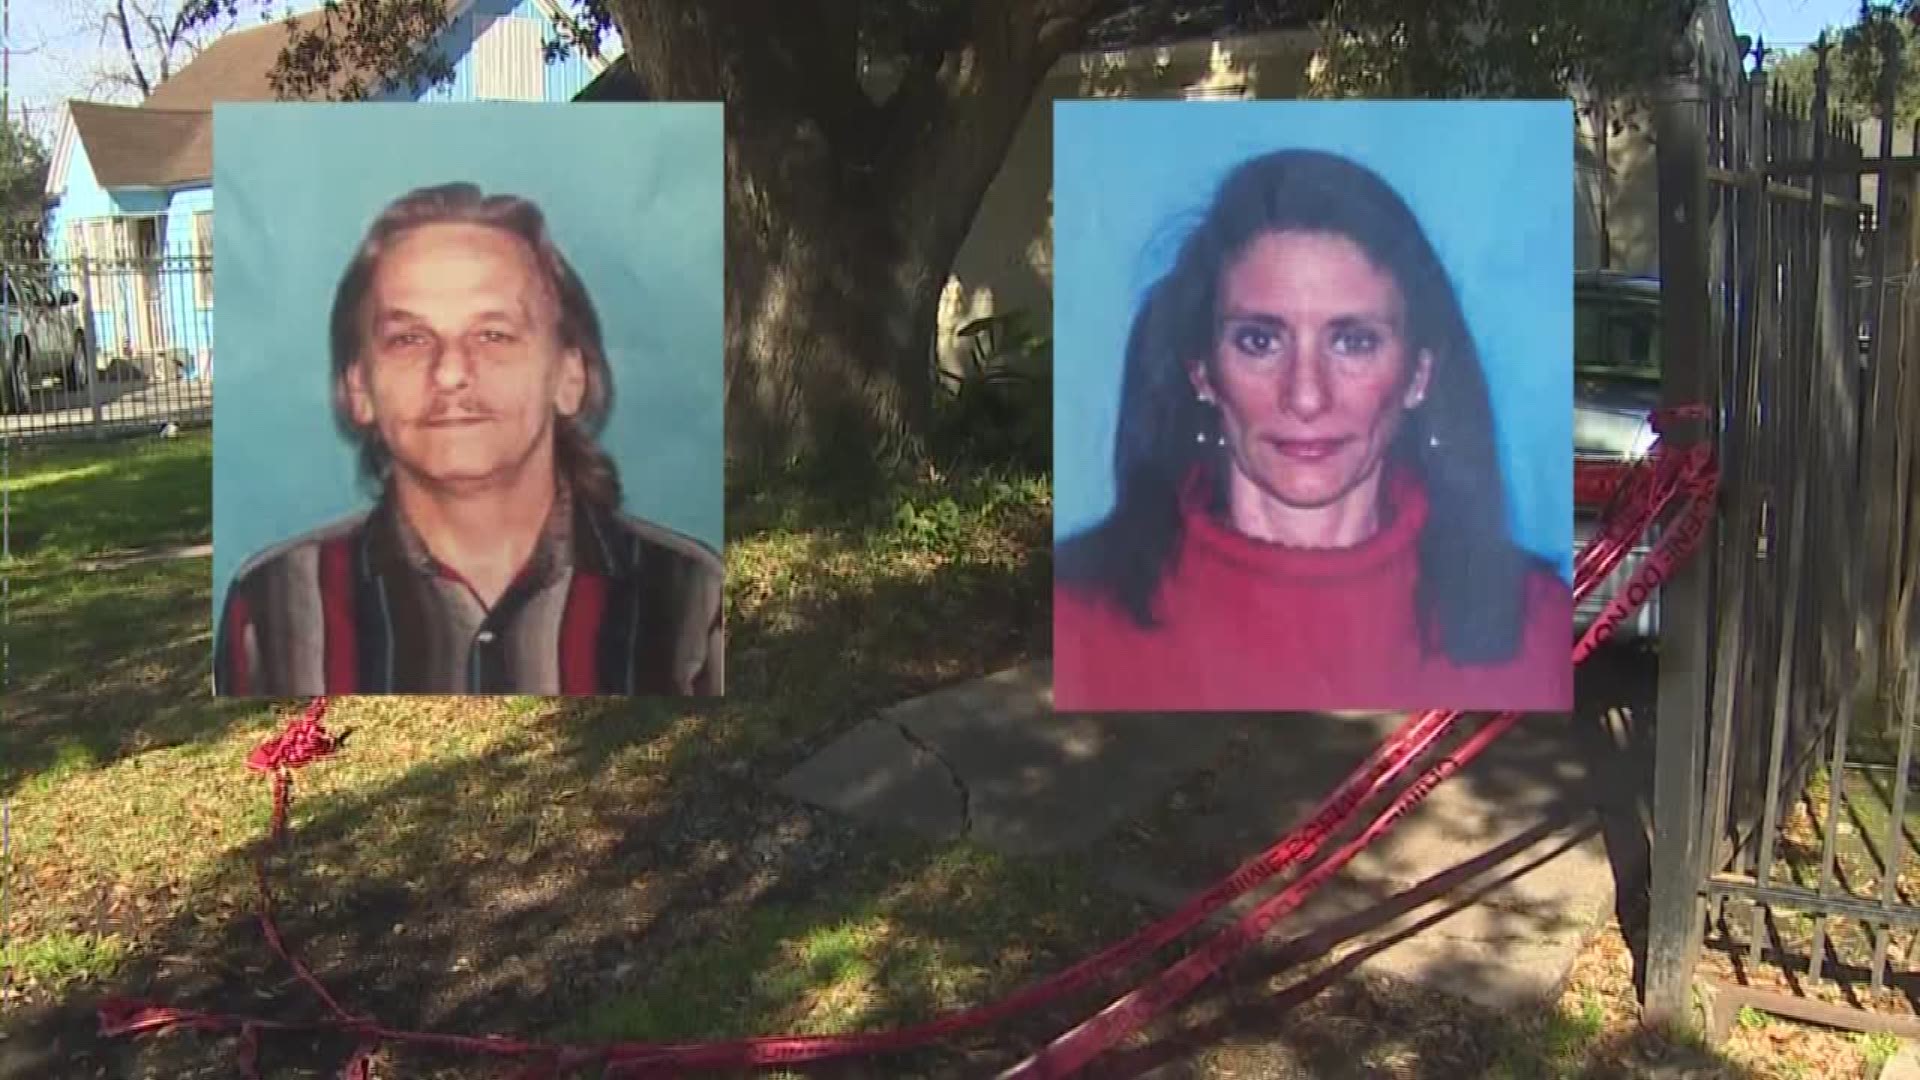 Dennis Tuttle and Rhogena Nicholas, the suspects who wounded five police officers, did not have long rap sheets, KHOU 11 Investigates found.